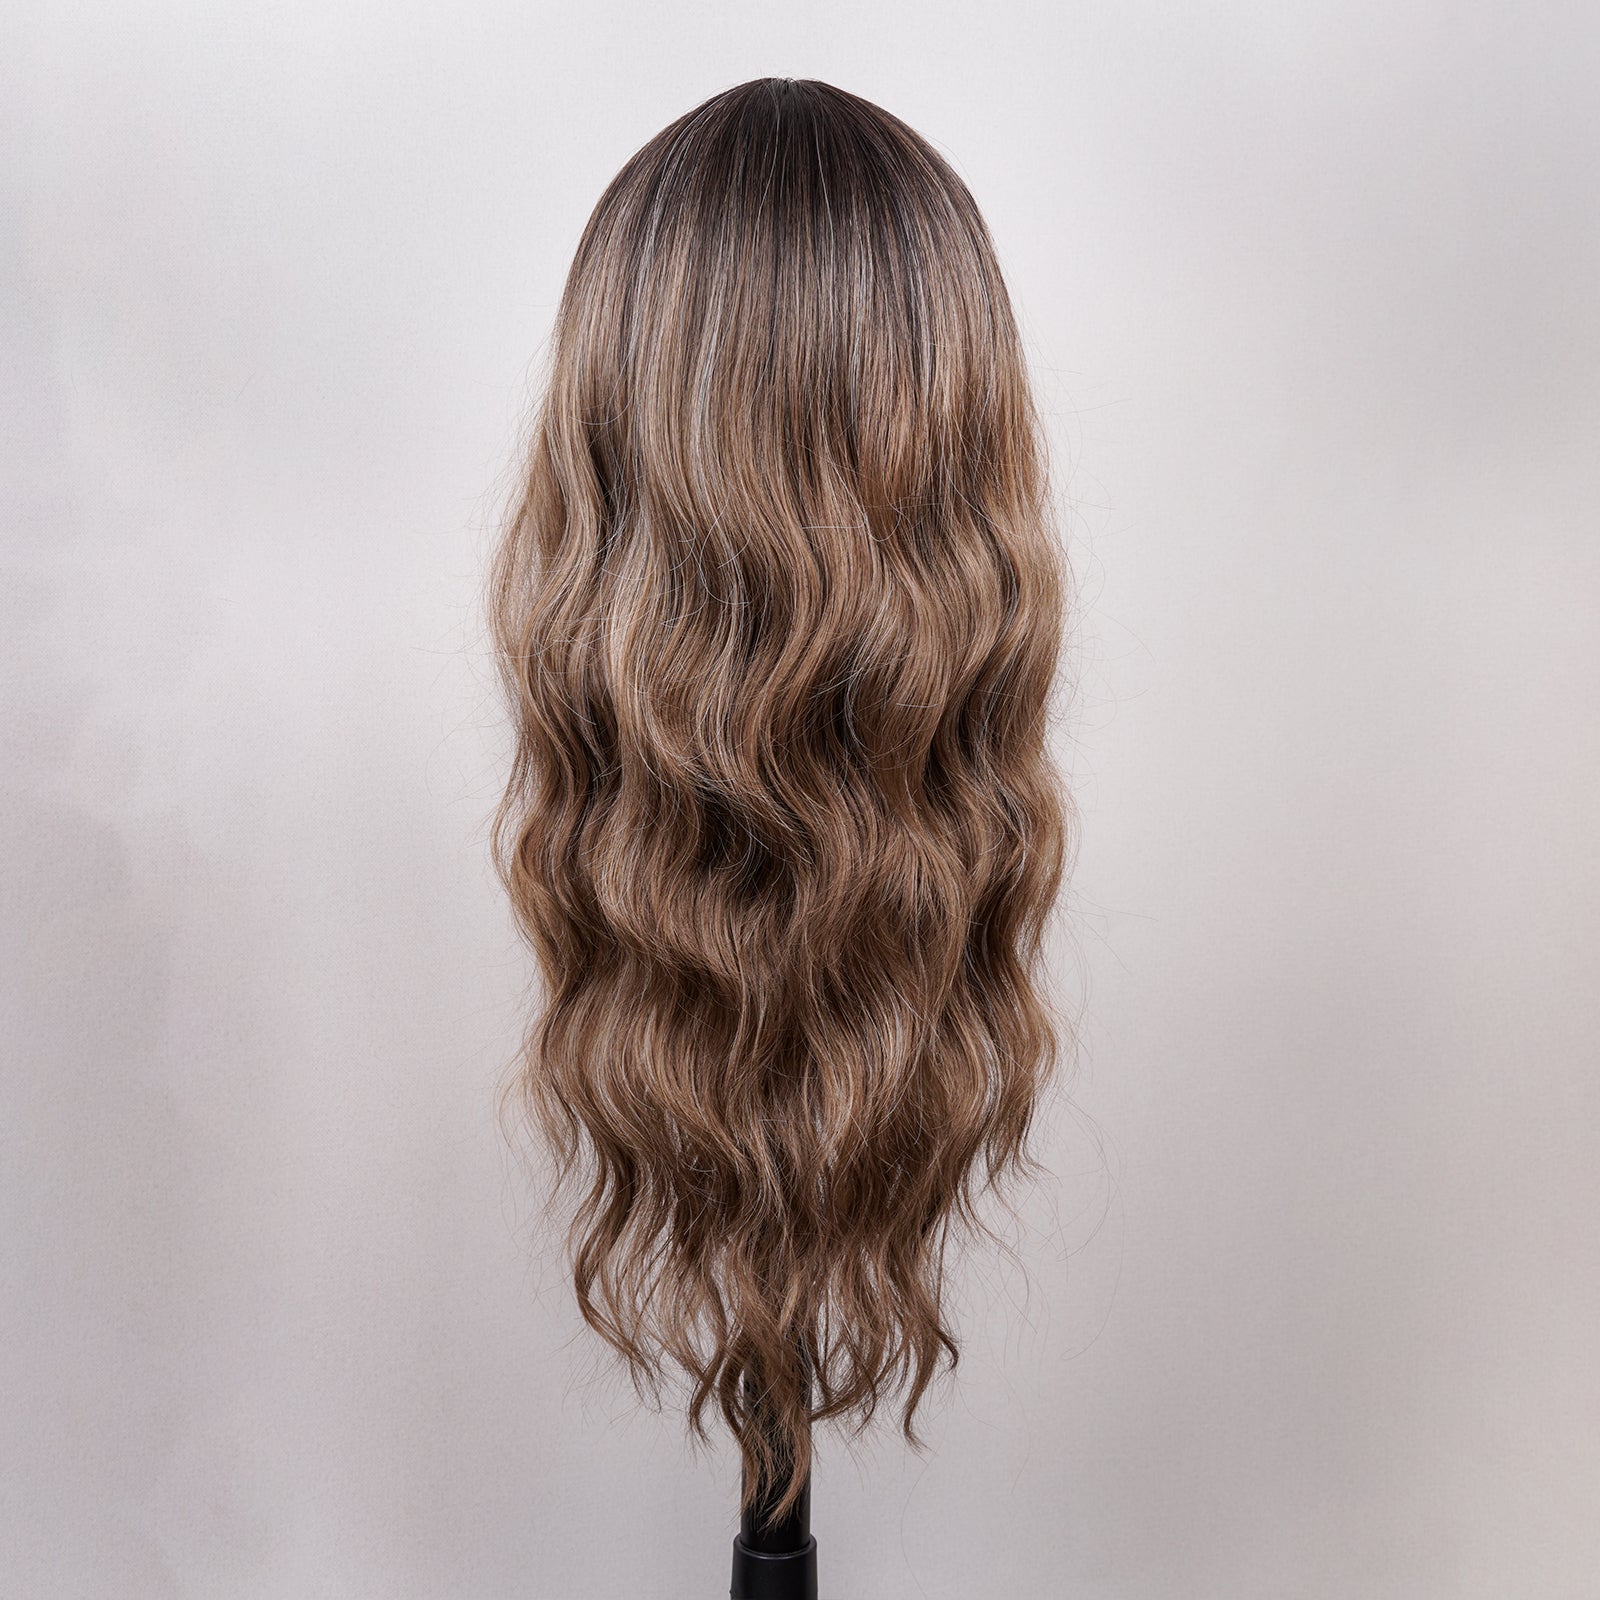 Toyotress New Long Wavy Wig Middle Part Highlights Wigs Synthetic Heat Resistant Curly Wig